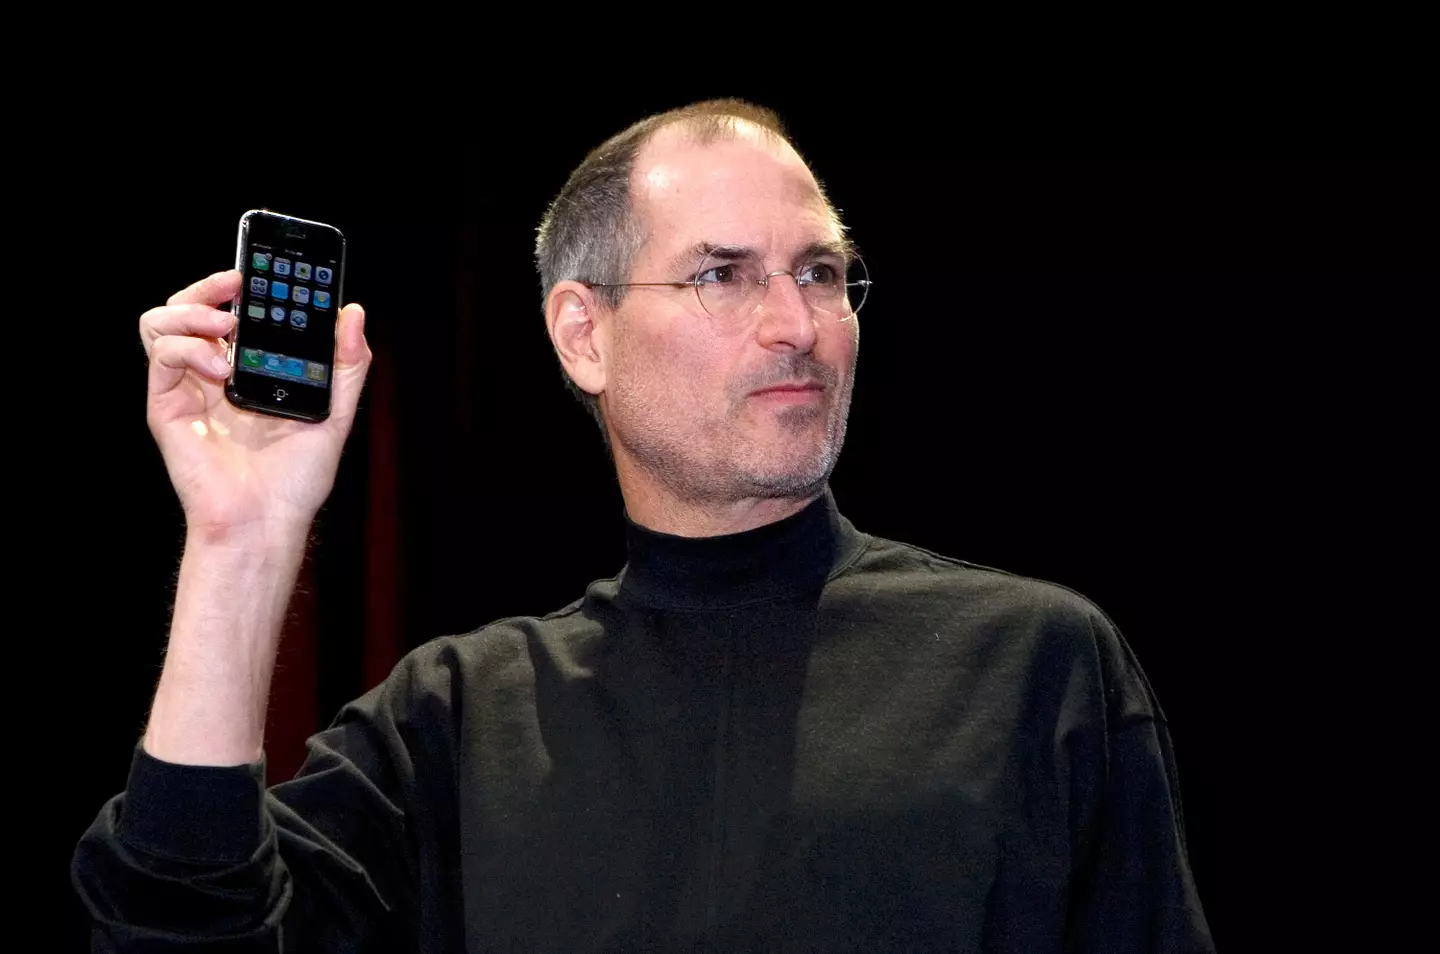 Steve Jobs unveils the very first iPhone in January 2007.